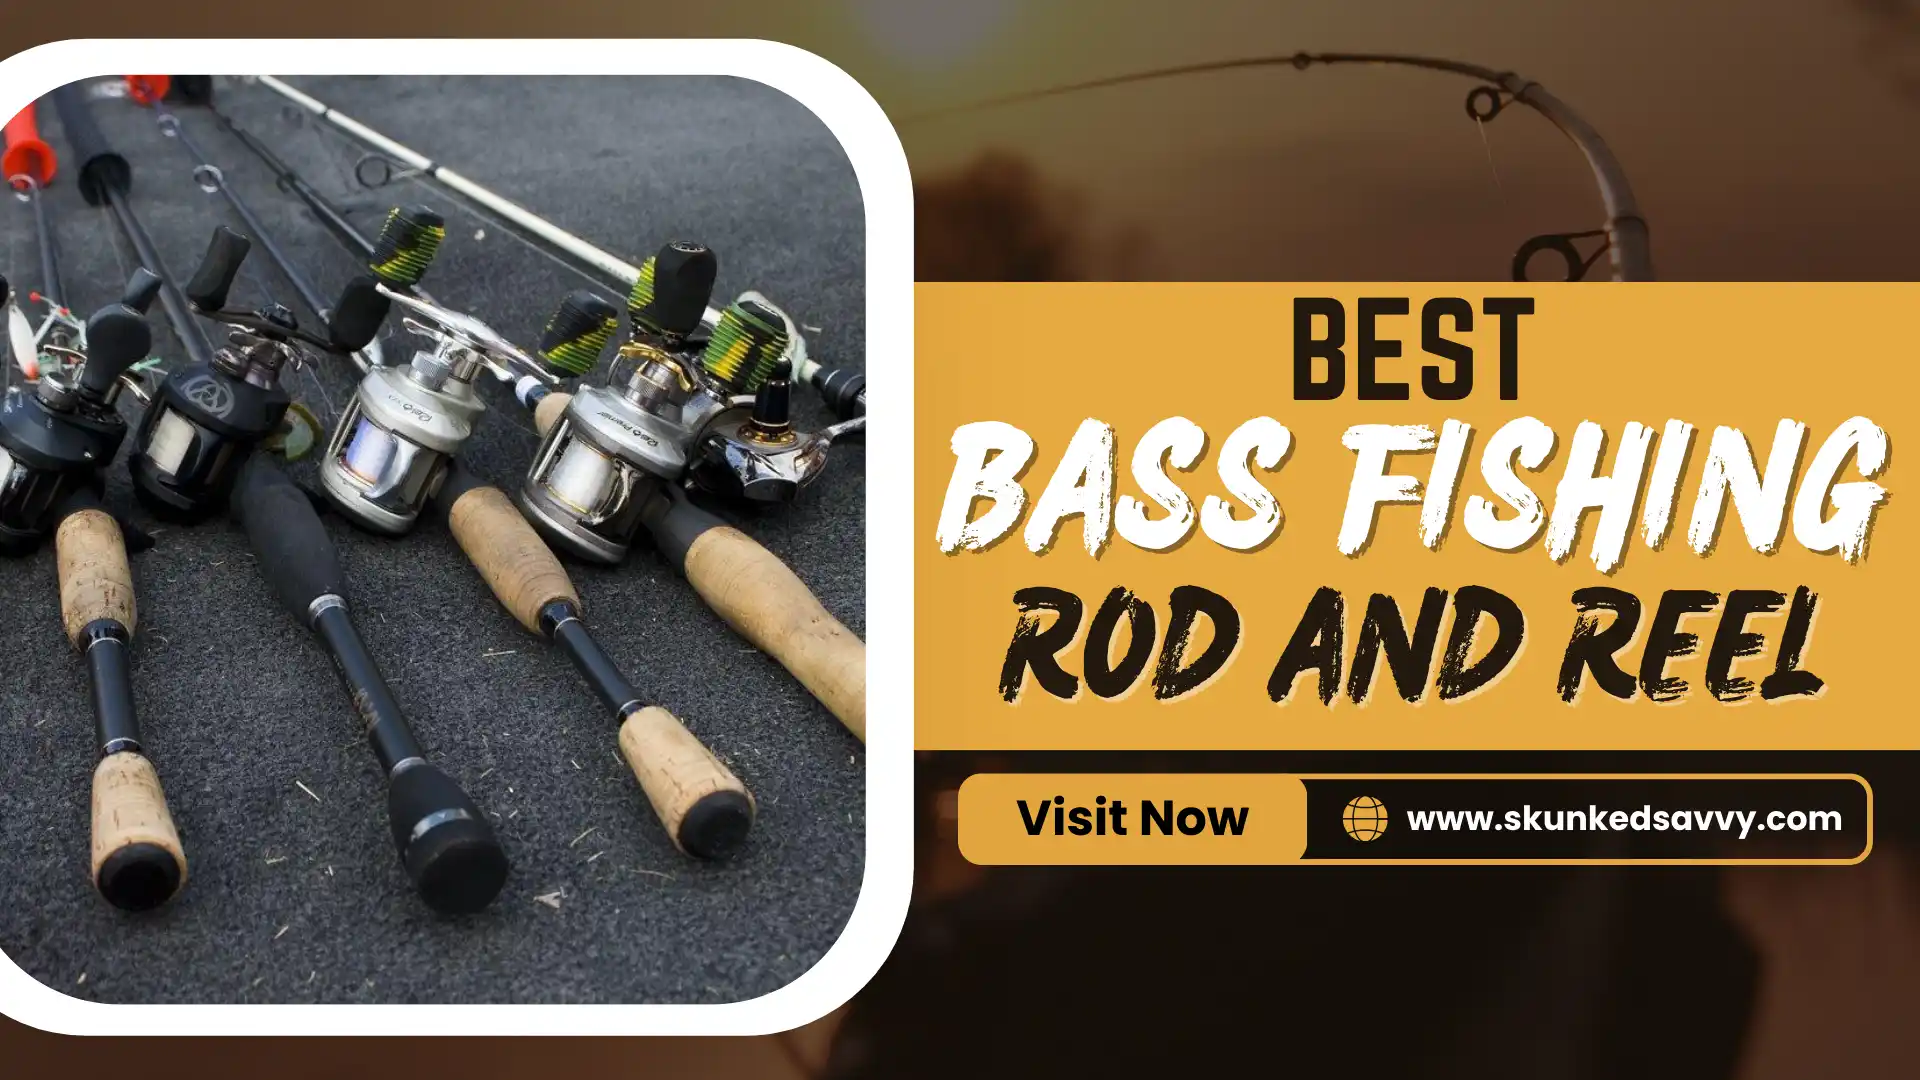 Best Bass Fishing Rod And Reel